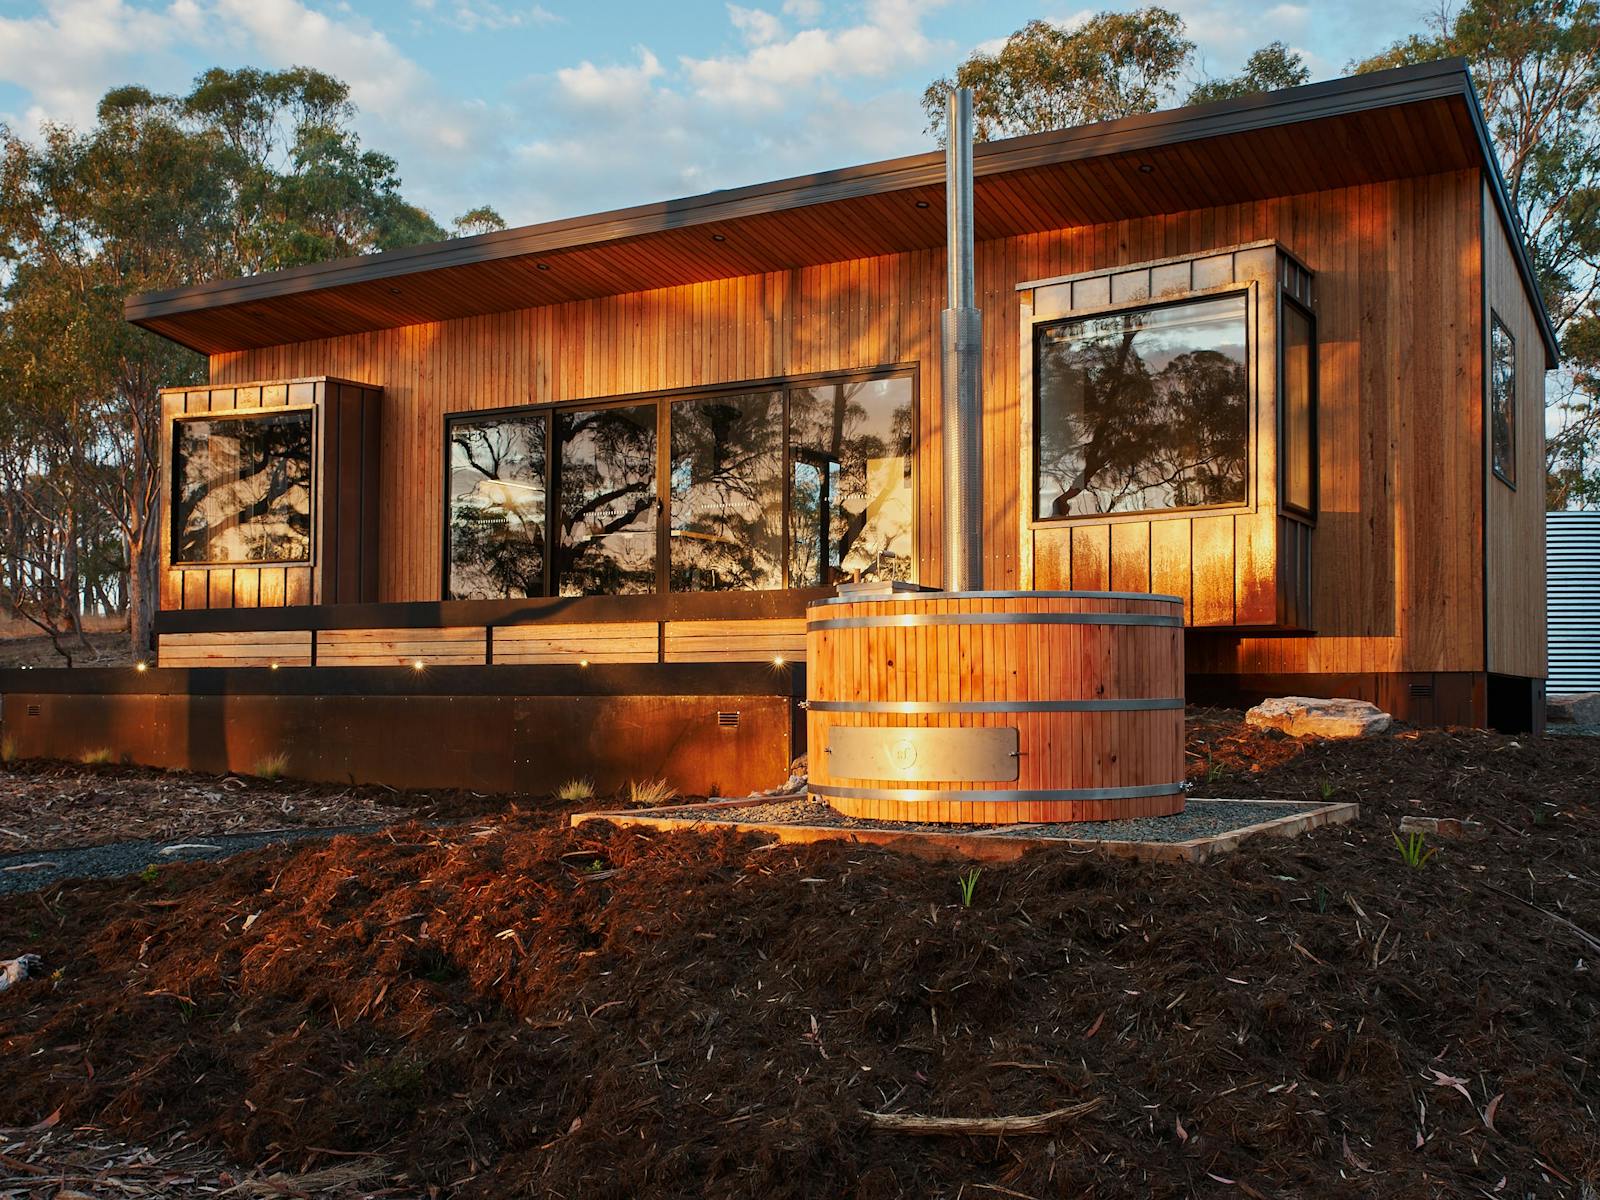 Blue Gum clad exterior cabin in bush setting with woodfired hot tub